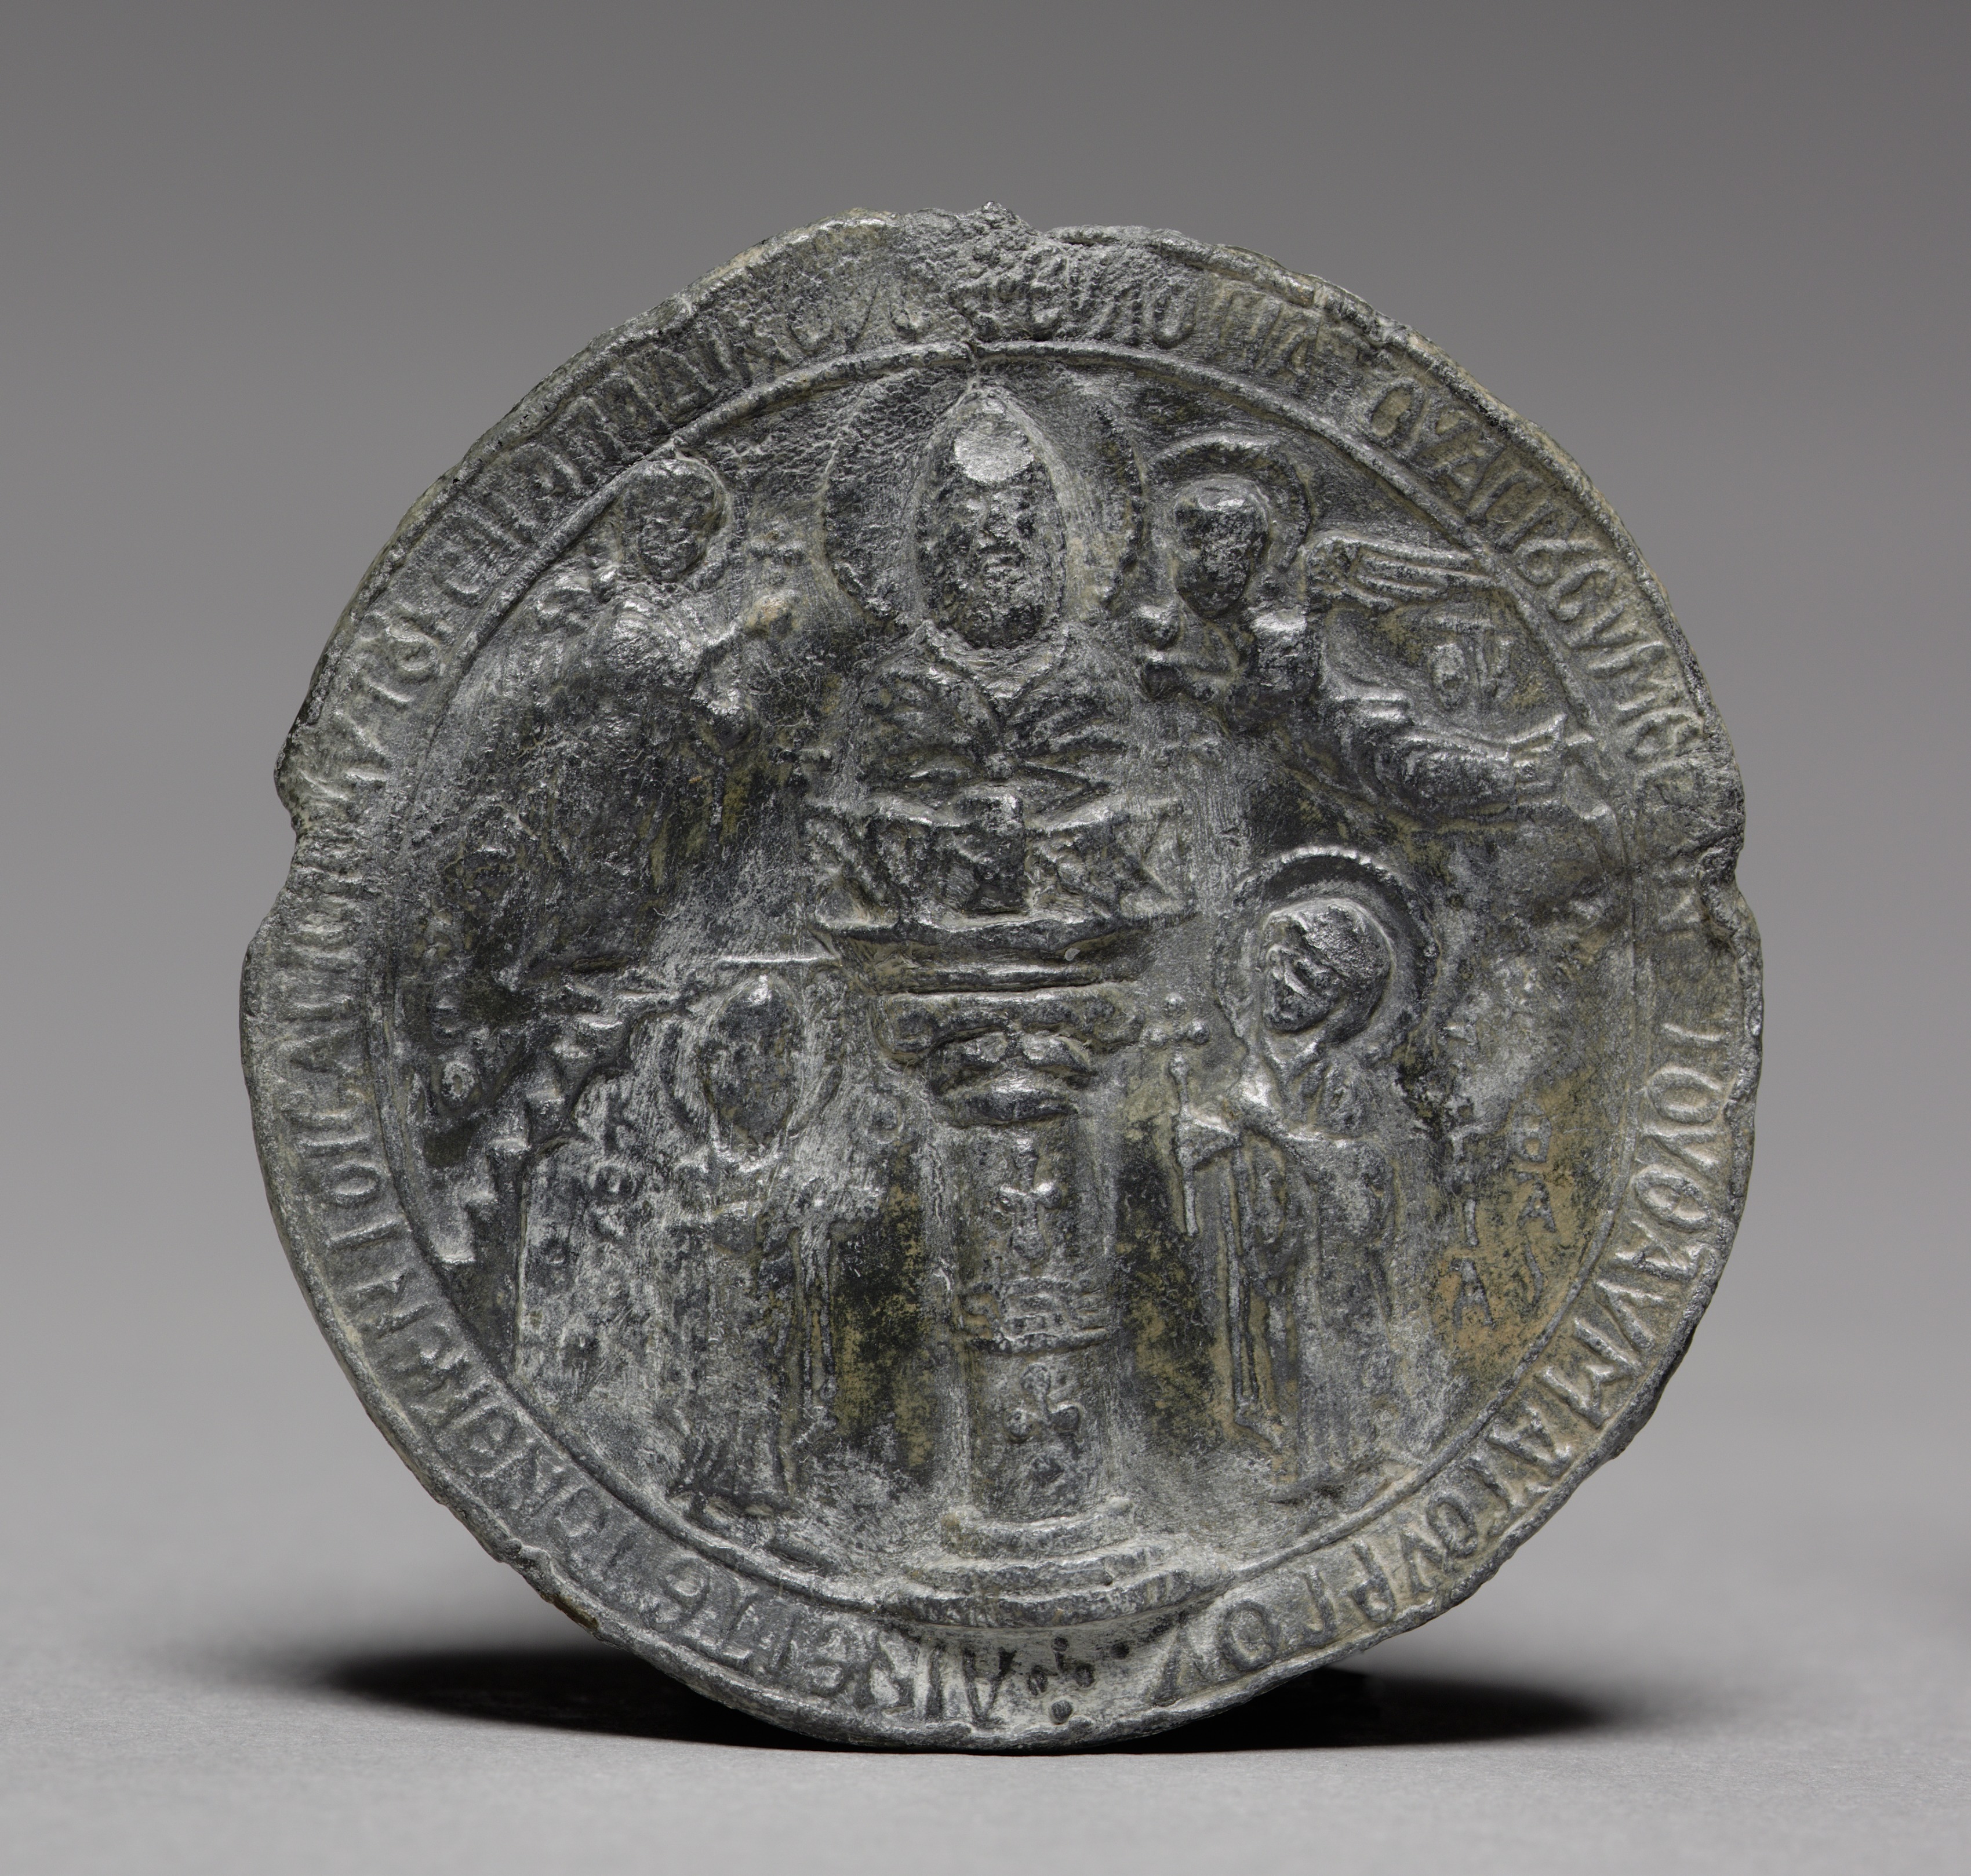 Pilgrim's Medallion with Saint Symeon the Younger